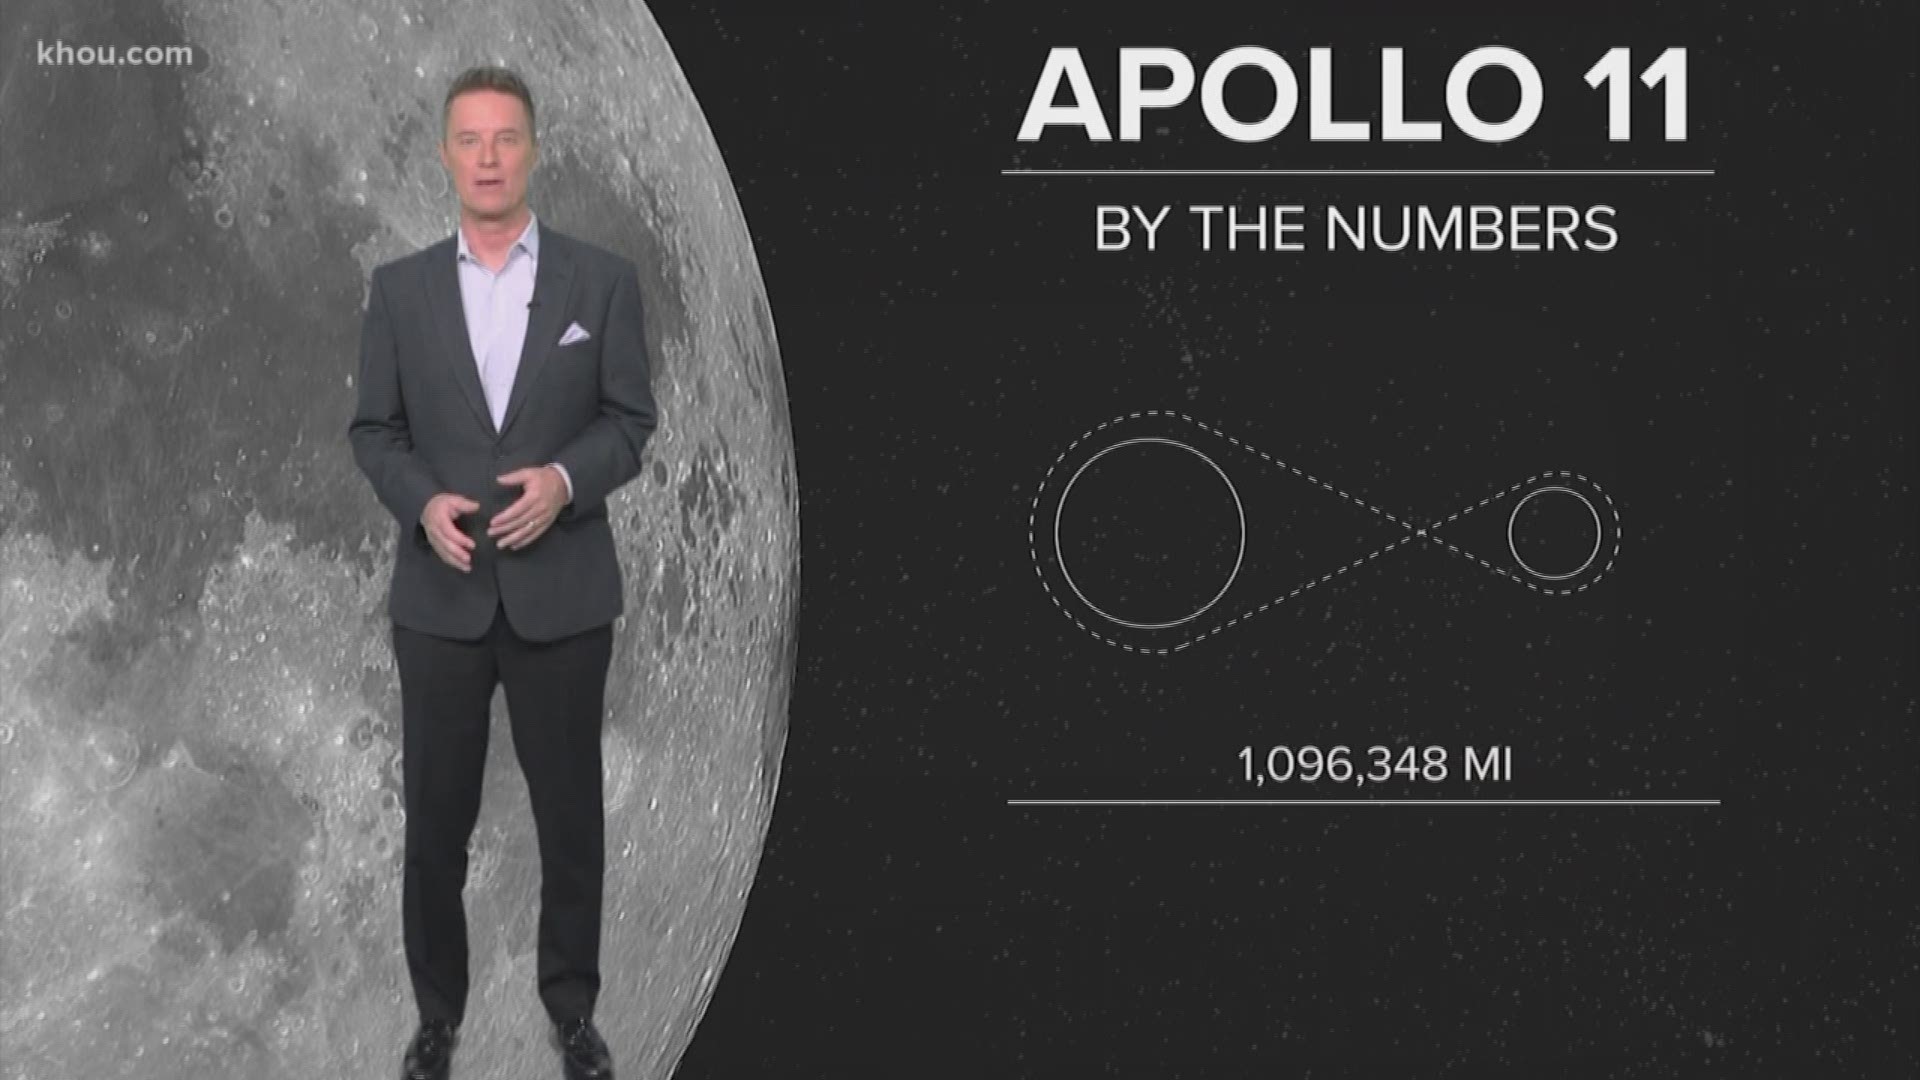 Apollo 11 by the numbers video